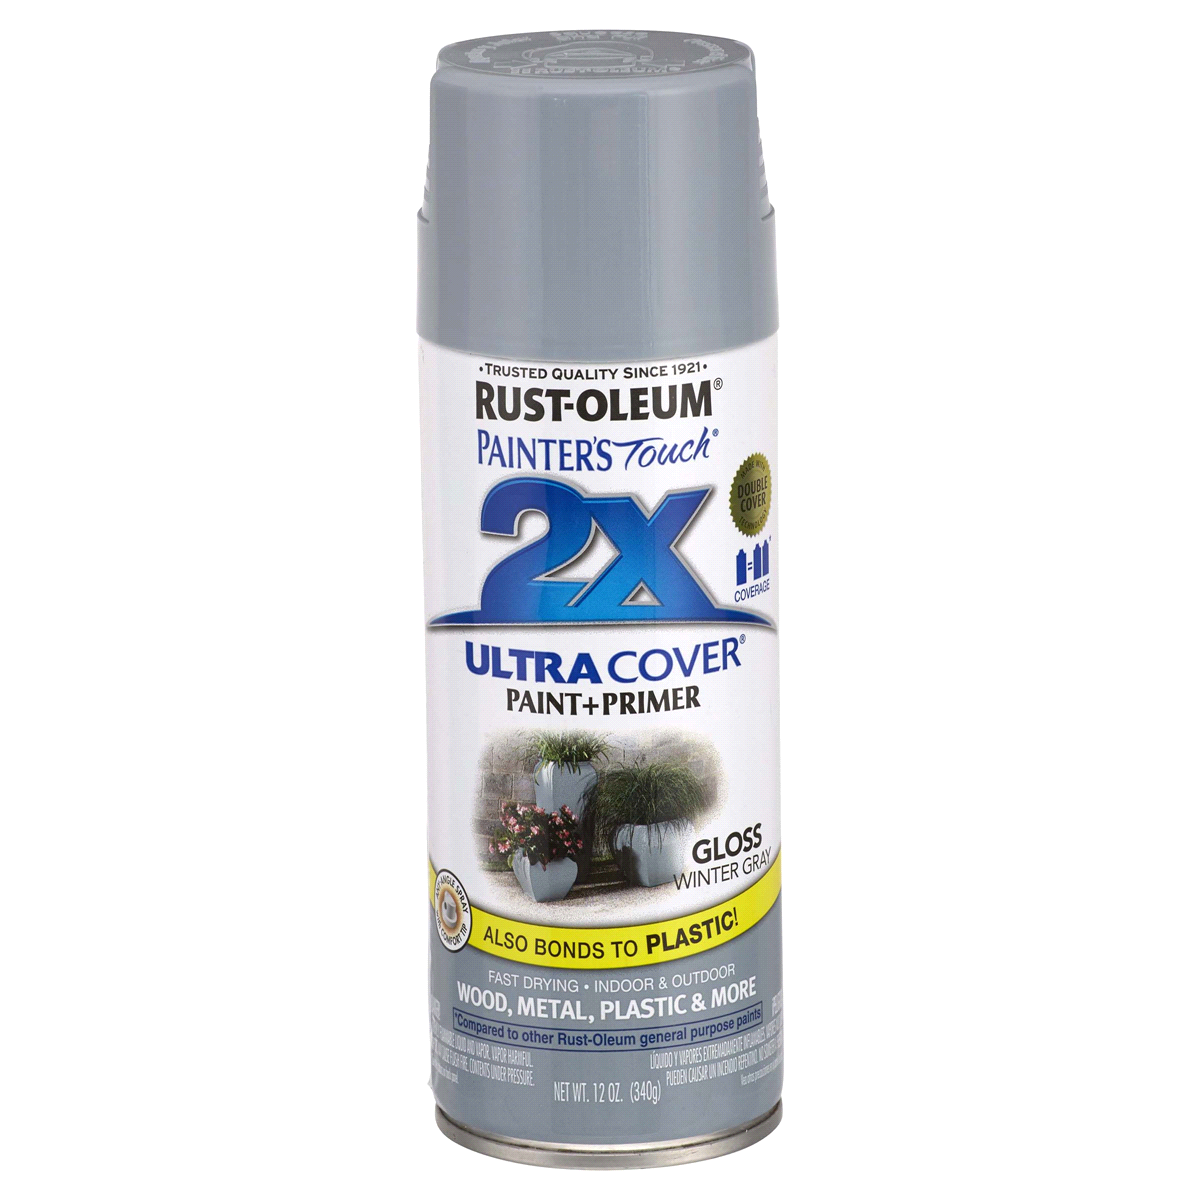 slide 1 of 1, Rust-Oleum Painters Touch 2X Ultra Cover Spray Paint - 249089, Gloss Winter Gray, 12 oz